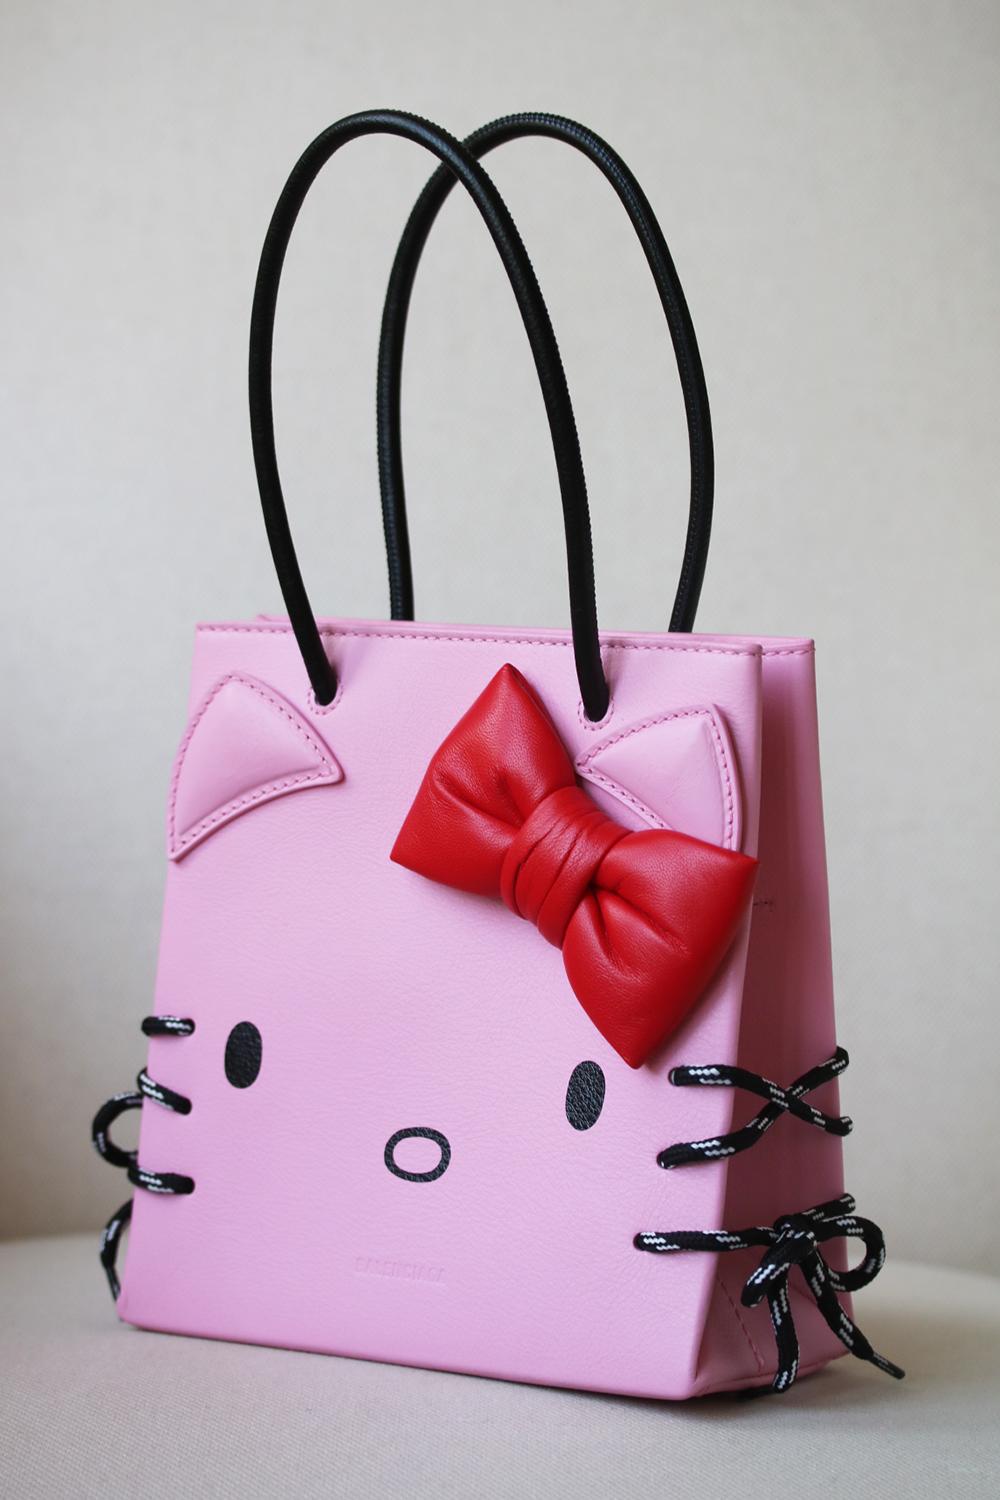 Designed in collaboration with Hello Kitty, Balenciaga's bag is complete with ears, a bow and whiskers, which are created using the laces from the brand's iconic Triple S sneakers. This small style has been made in Italy from baby-pink leather and